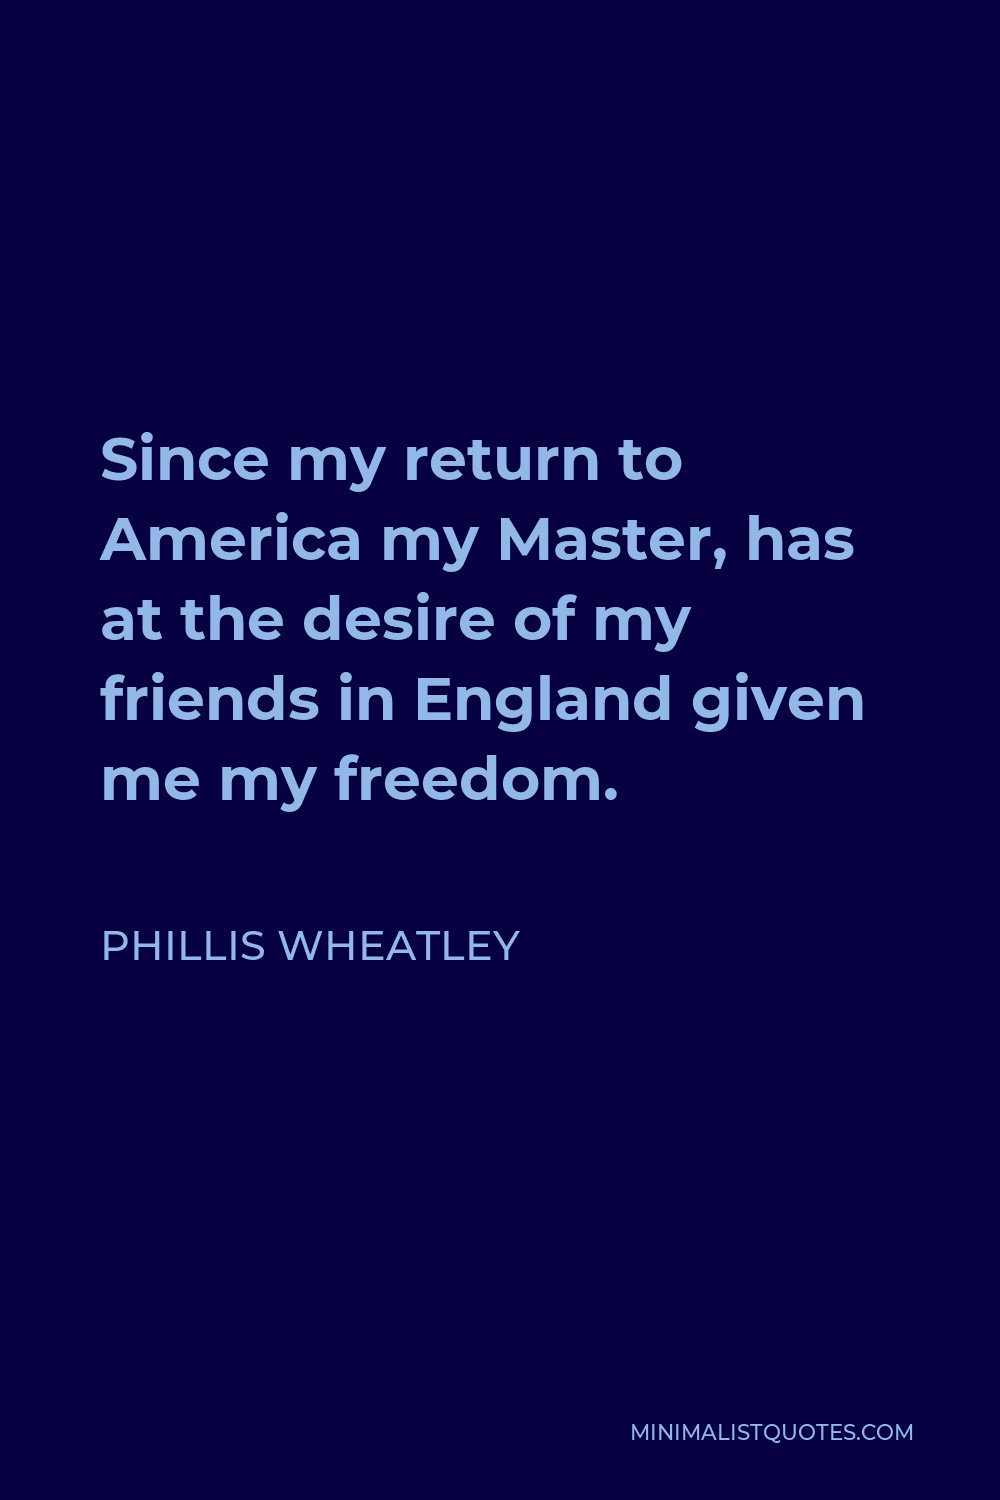 Phillis Wheatley Quote - Since my return to America my Master, has at the desire of my friends in England given me my freedom.